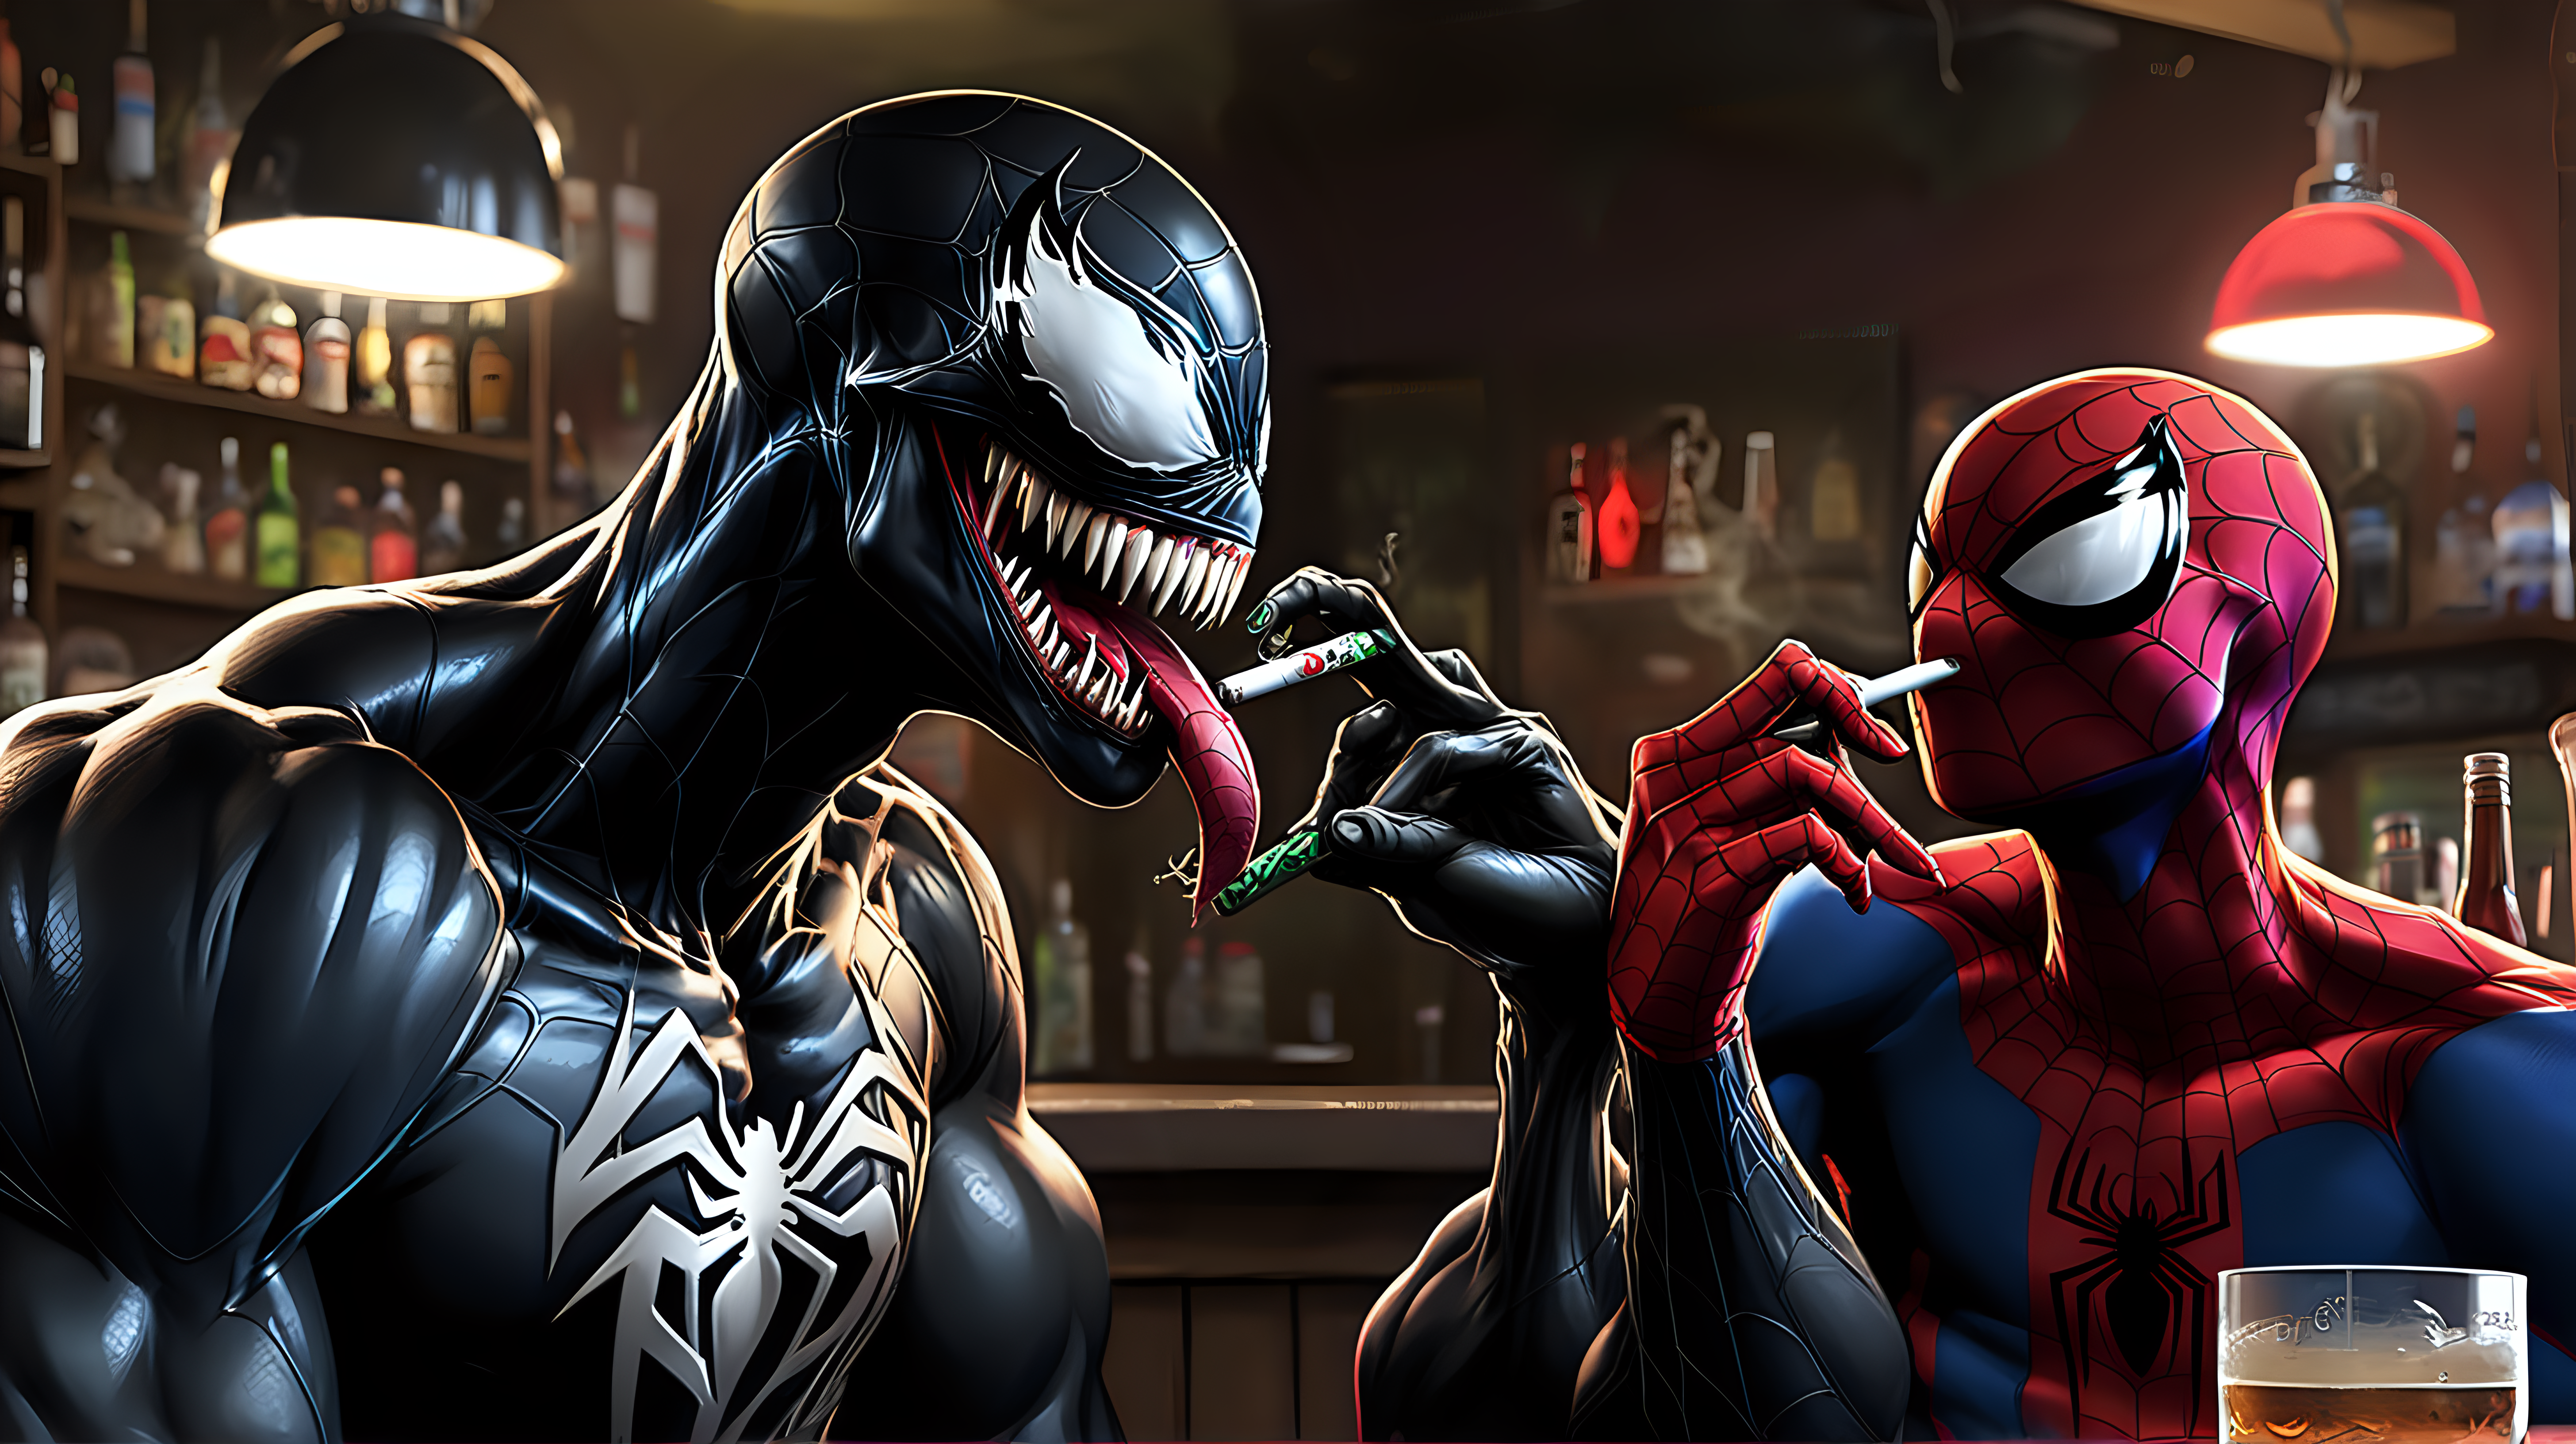 Venom smoking a joint at a bar with Spiderman